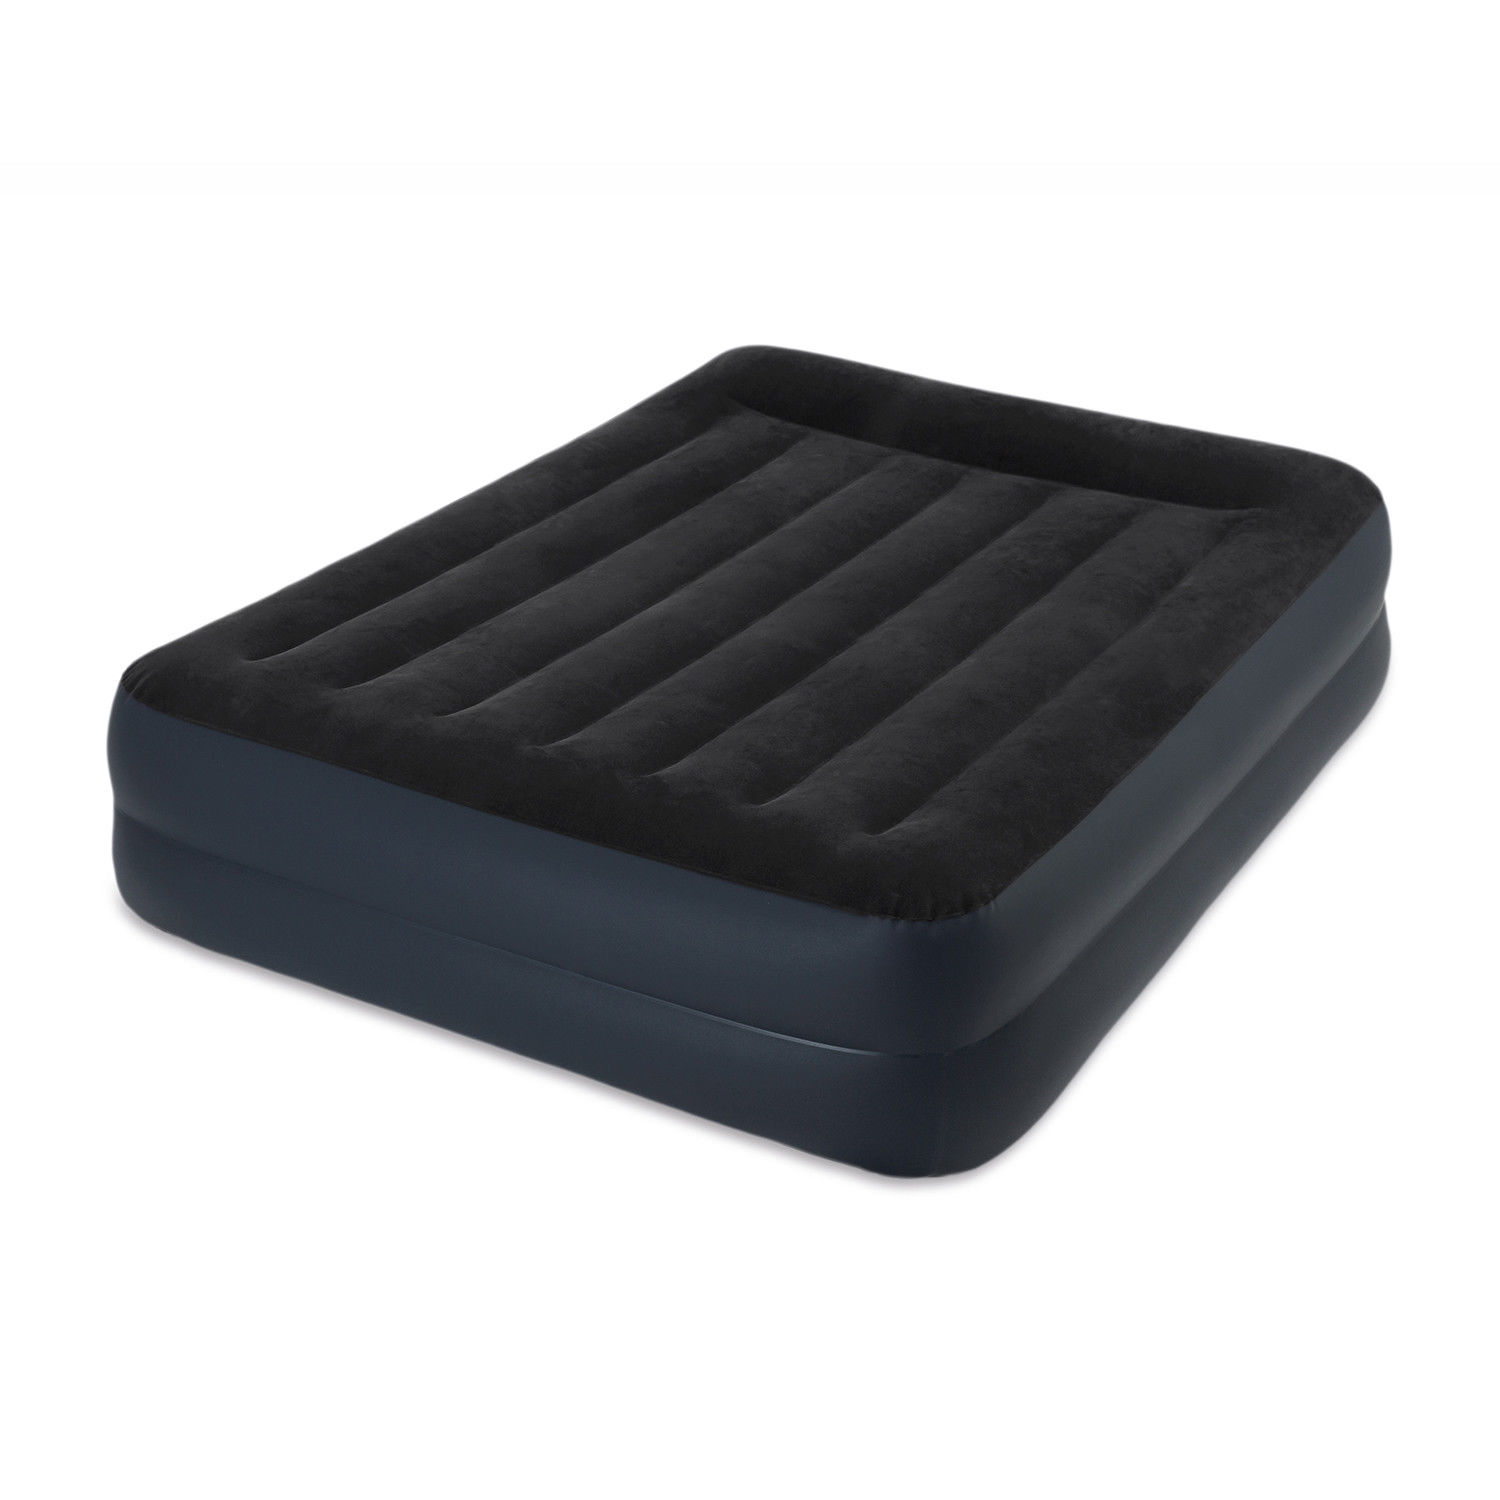 Intex Queen Pillow Rest Raised Fiber Tech Airbed Mattress Bed with Built In Pump - image 1 of 6